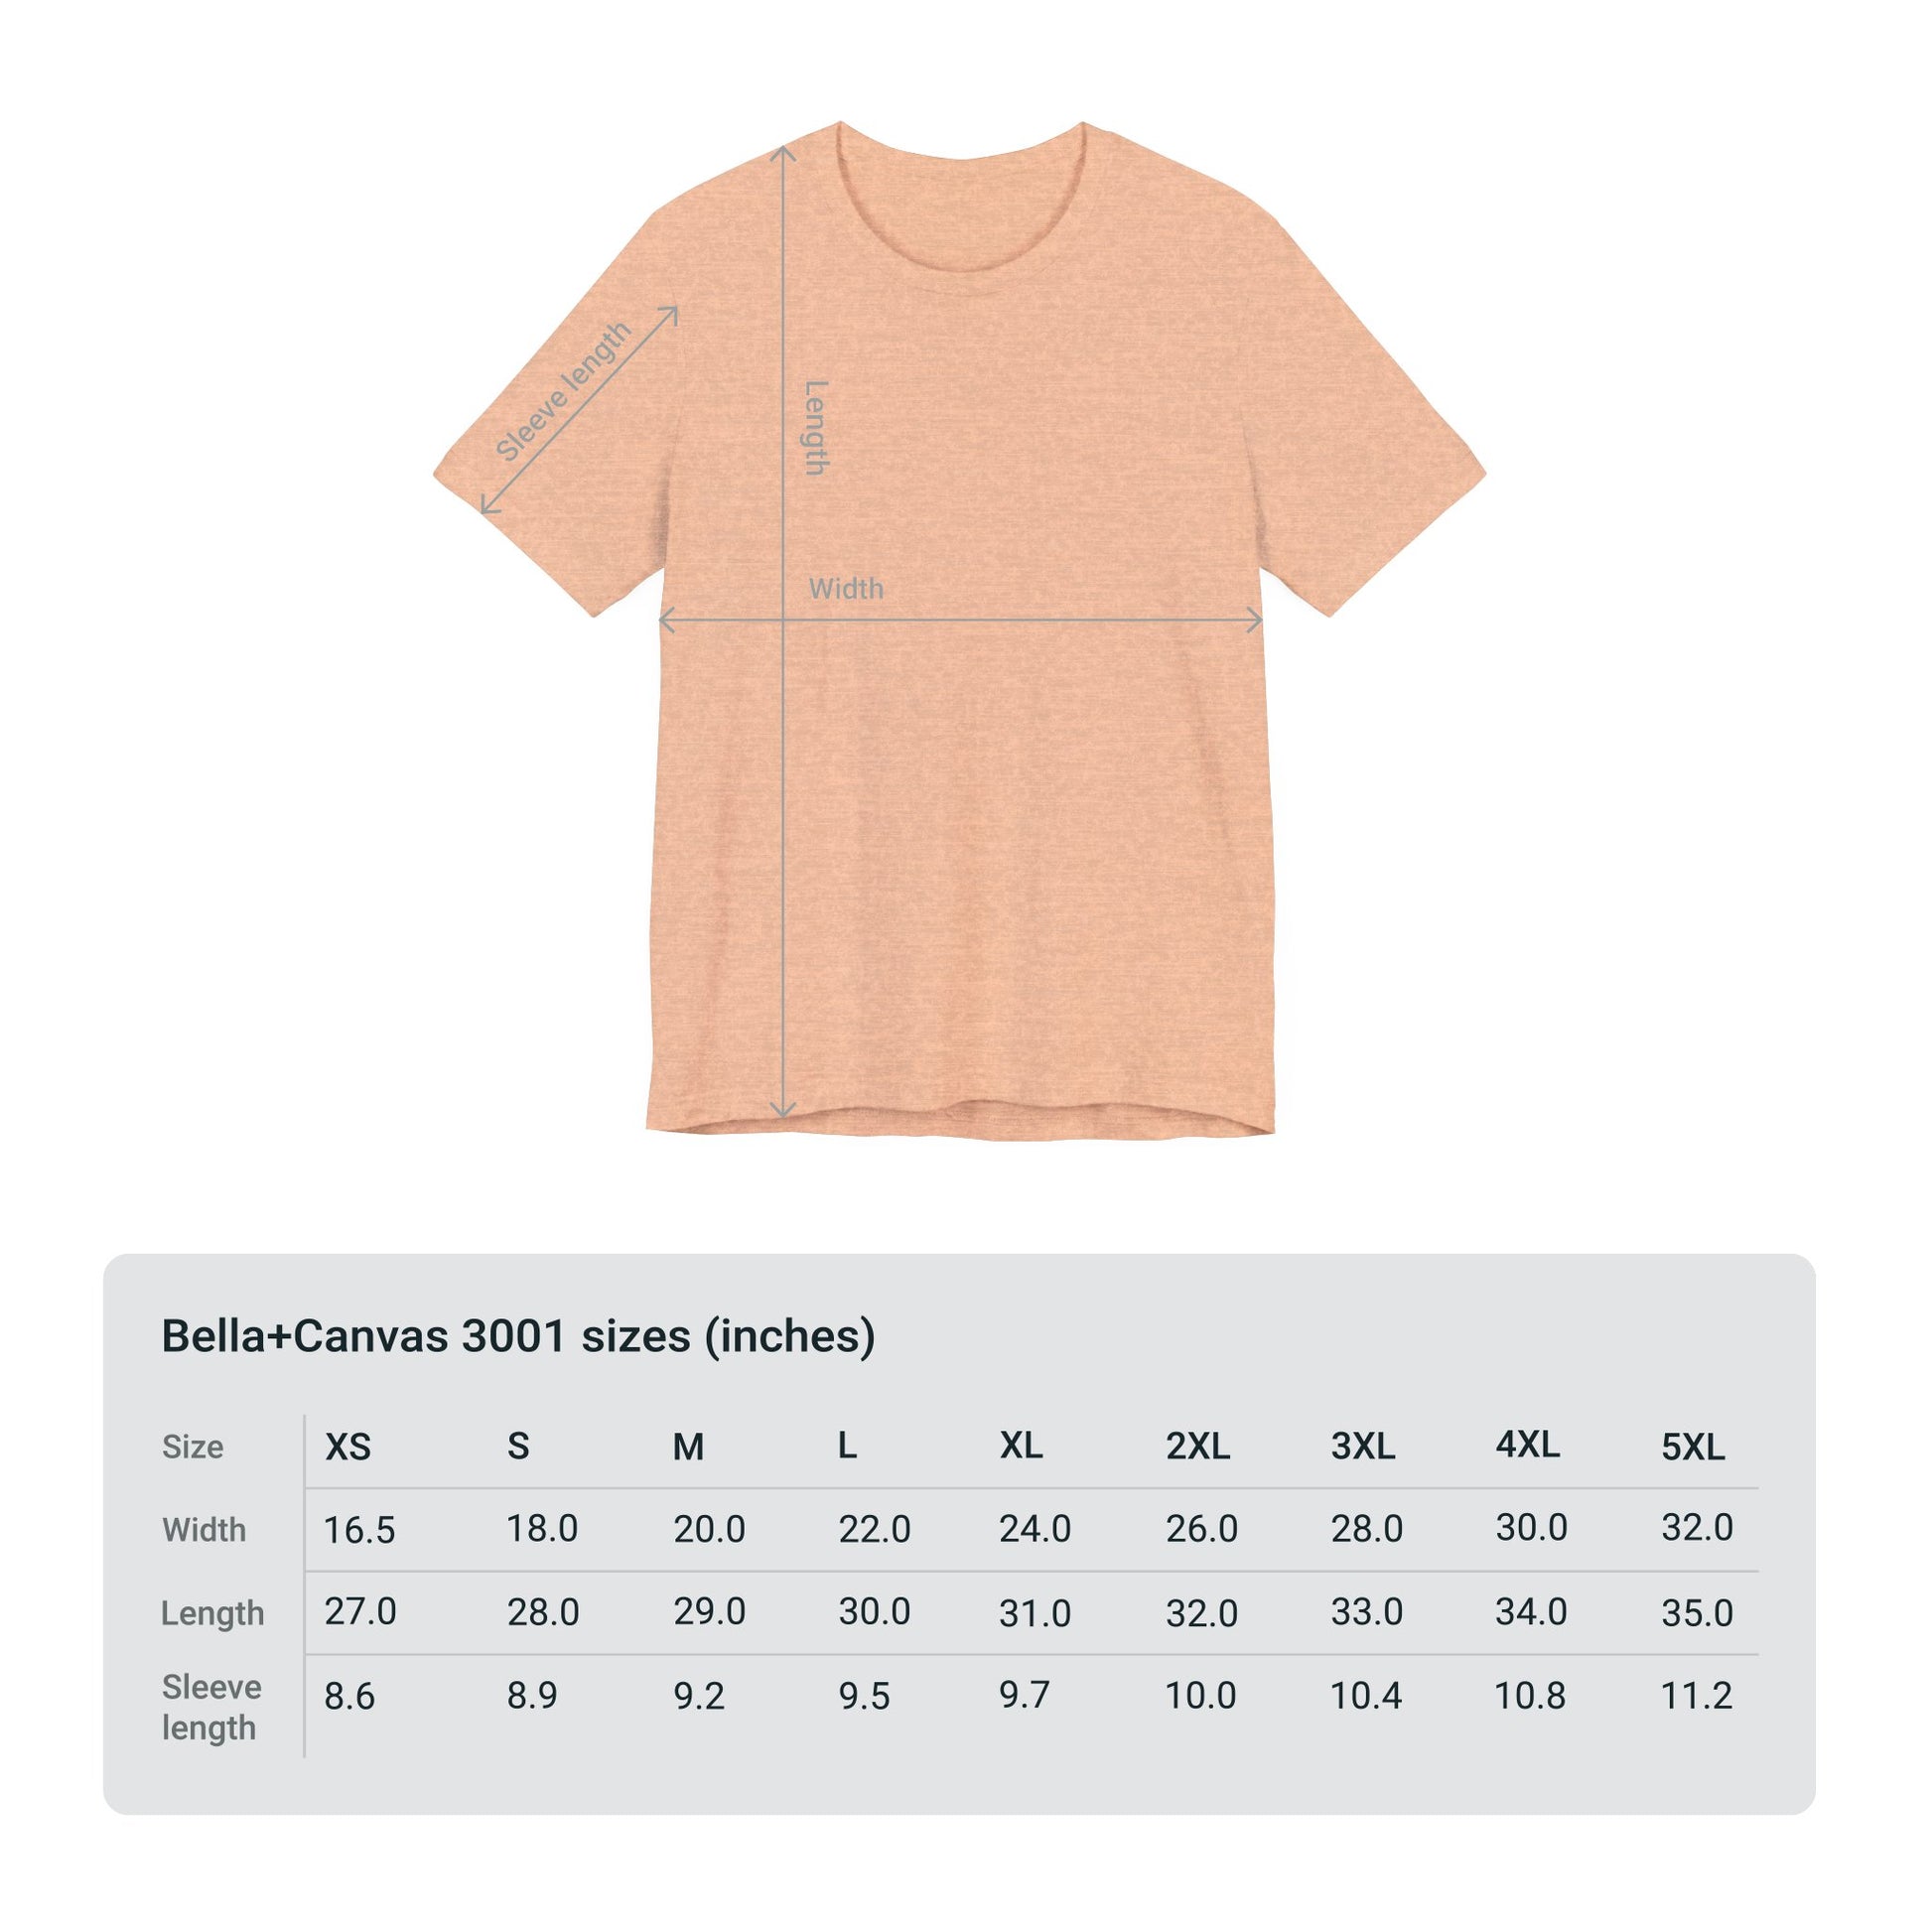 Peach-colored Printify Bella + Canvas 3001 voting women's t-shirt with size chart showing measurements from xs to 5xl.